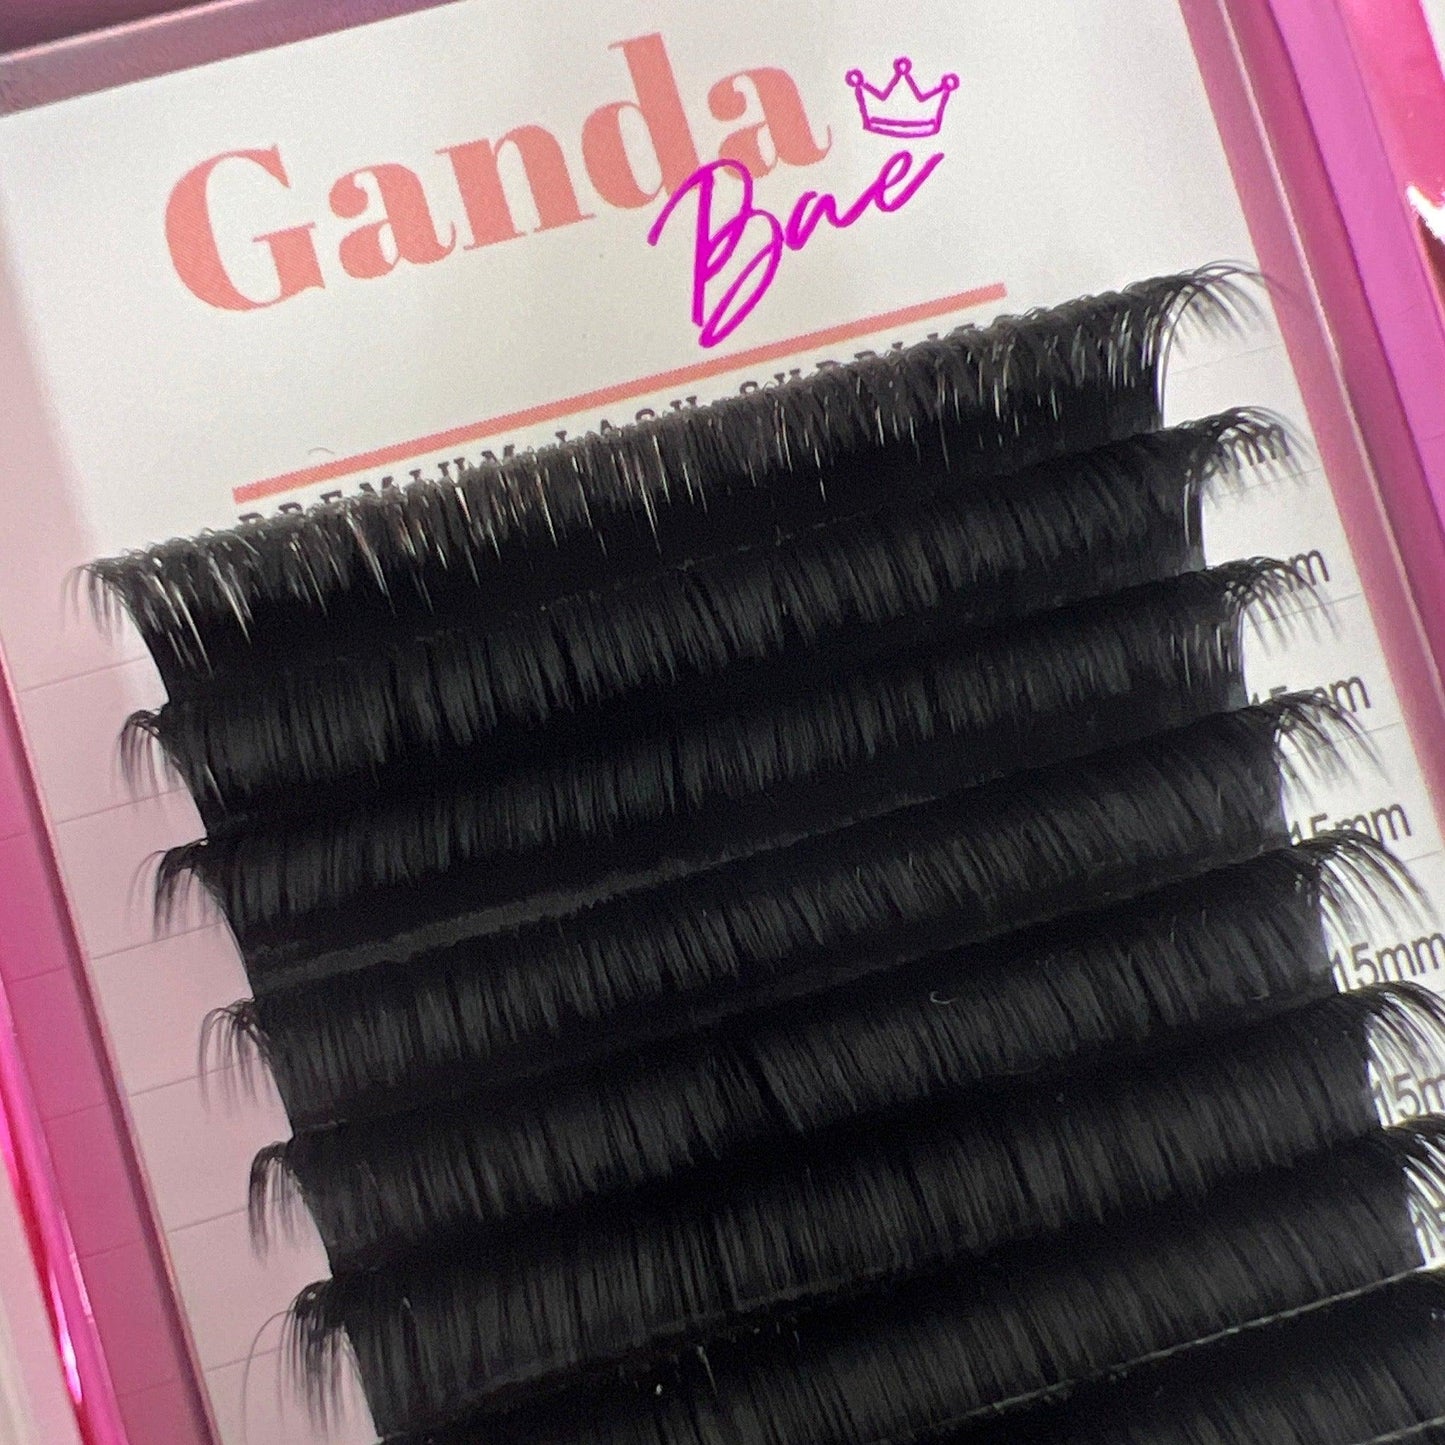 .03 (Strong D curl) “Fave" Easy Fan Lashes - Ganda Bae